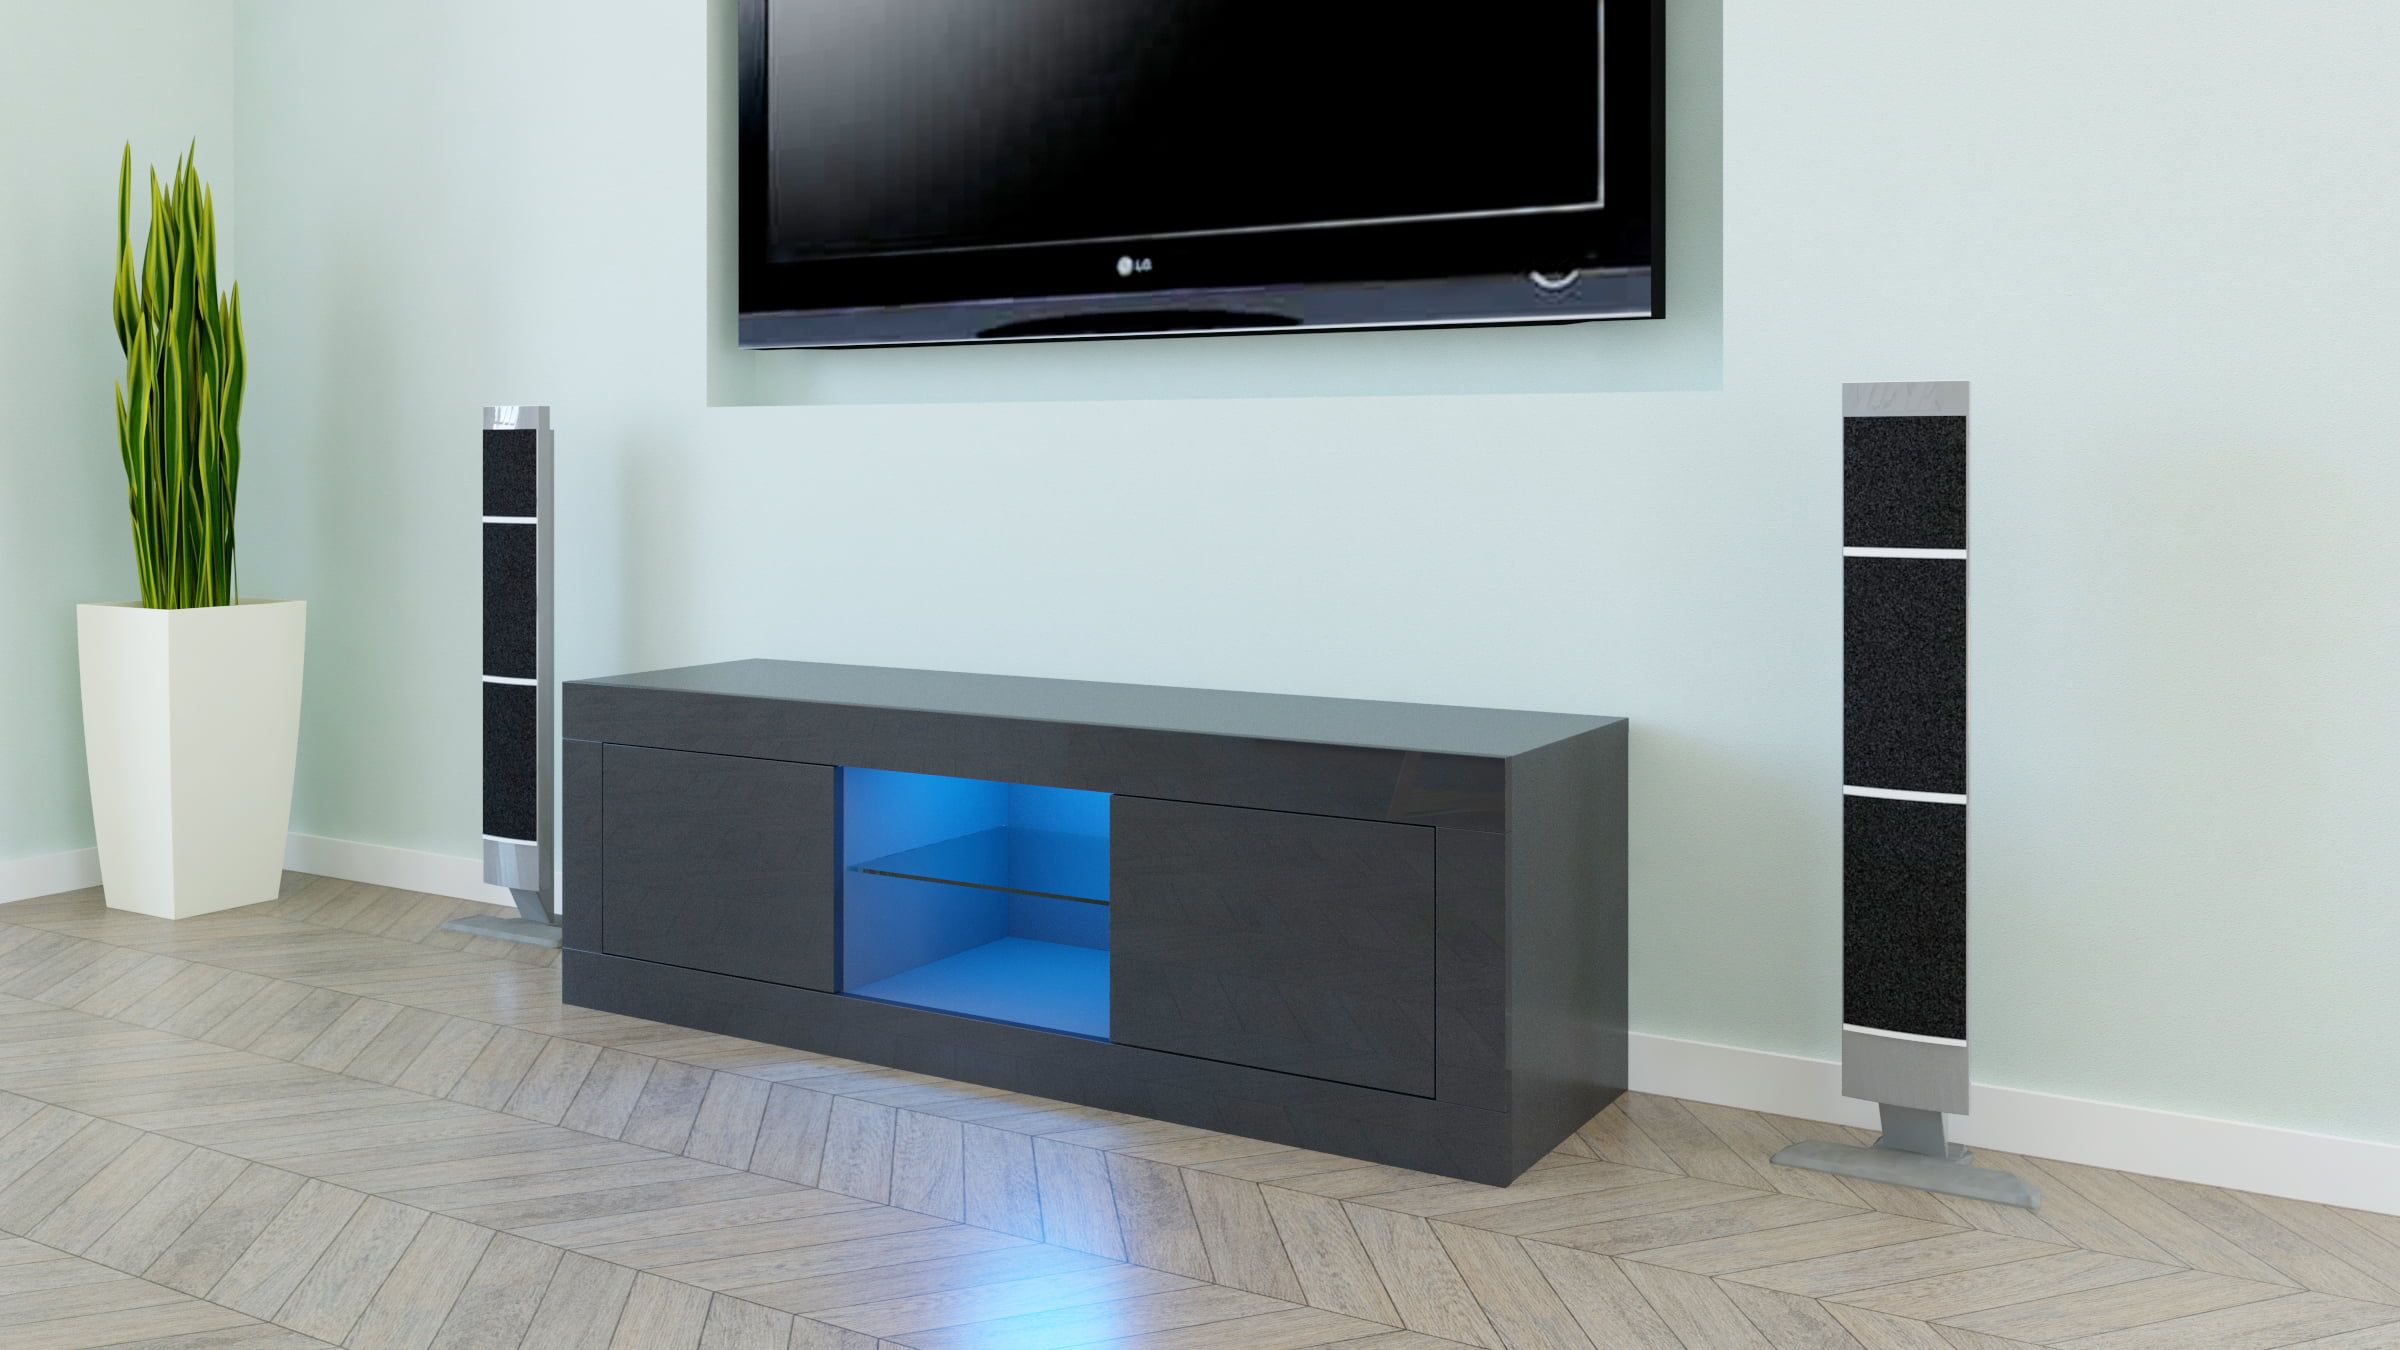 Zimtown Tv Stand Cabinet,modern Black Tv Stand With Led Light,high Within Tv Stands With Led Lights & Power Outlet (Gallery 2 of 20)